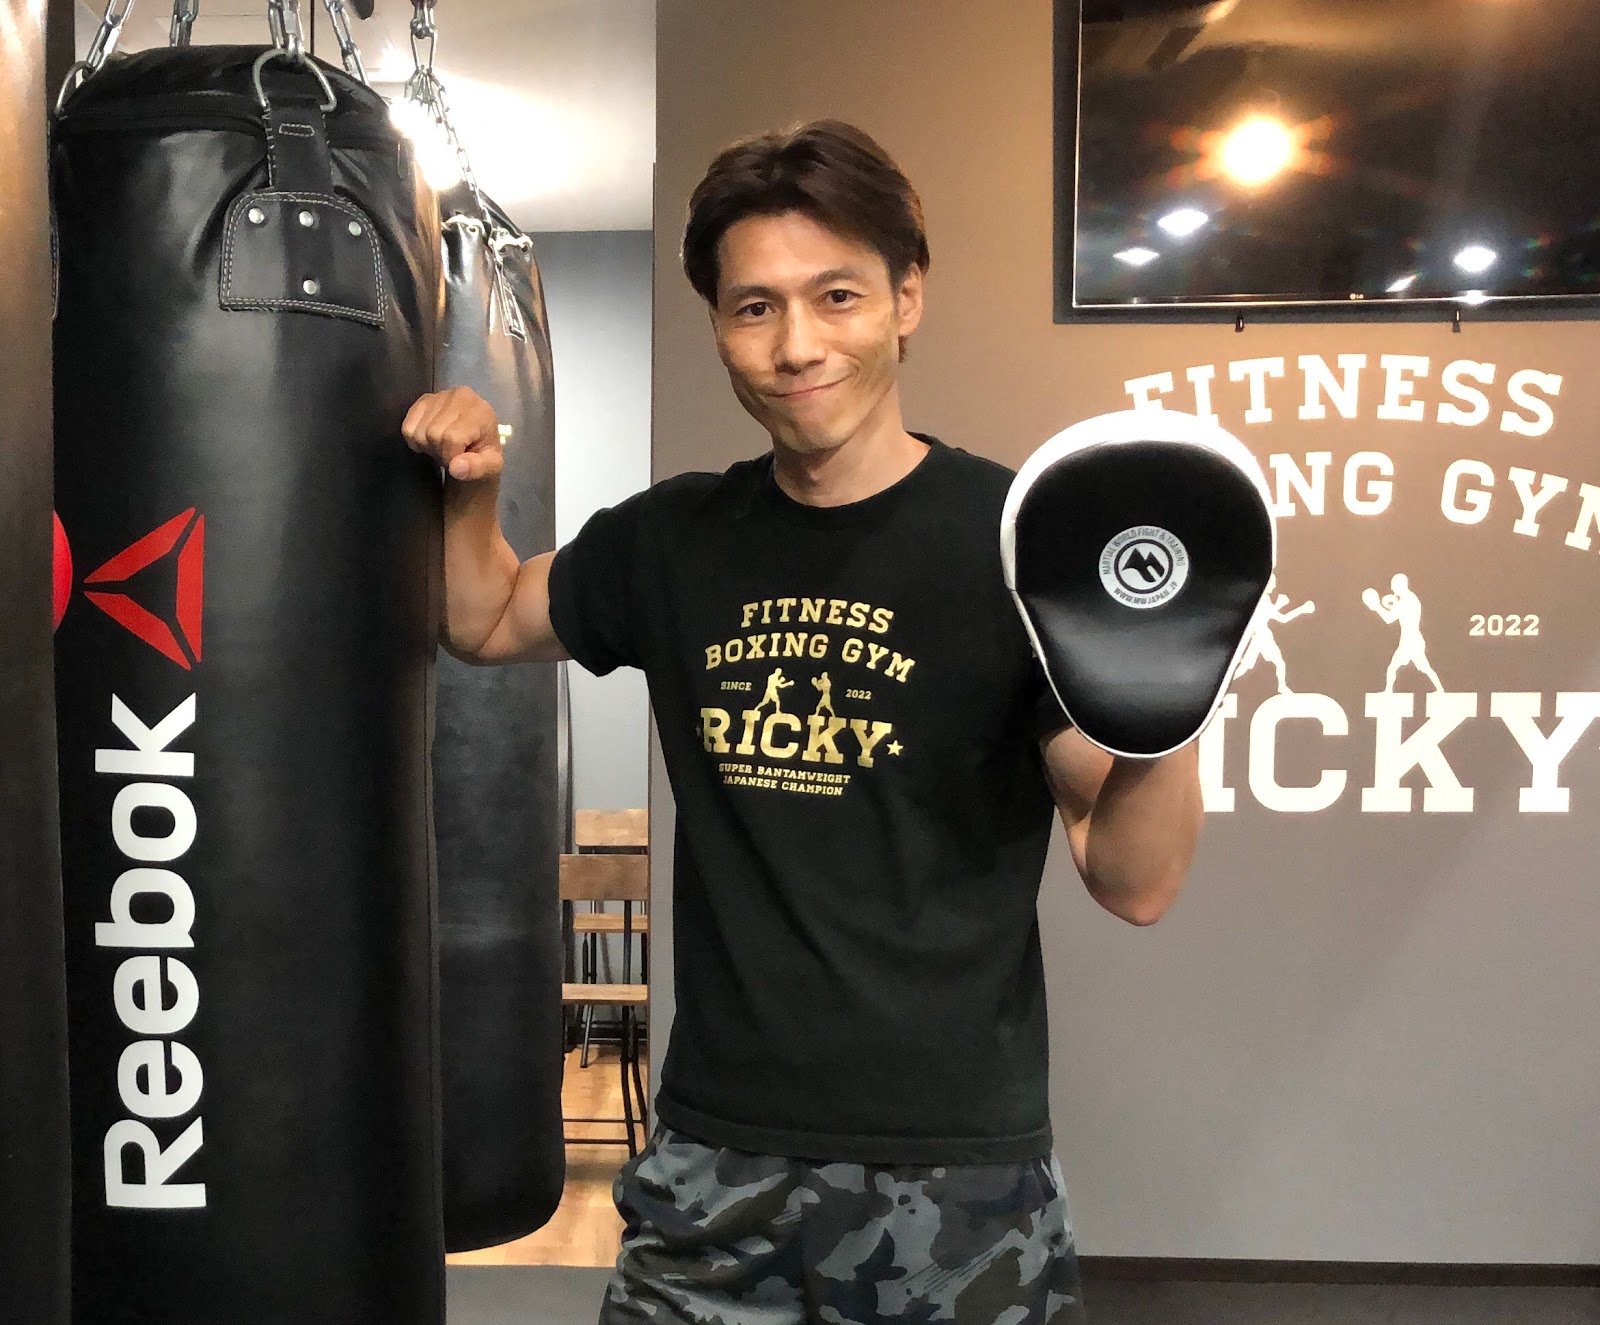 FITNESS BOXING GYM RICKYの風景